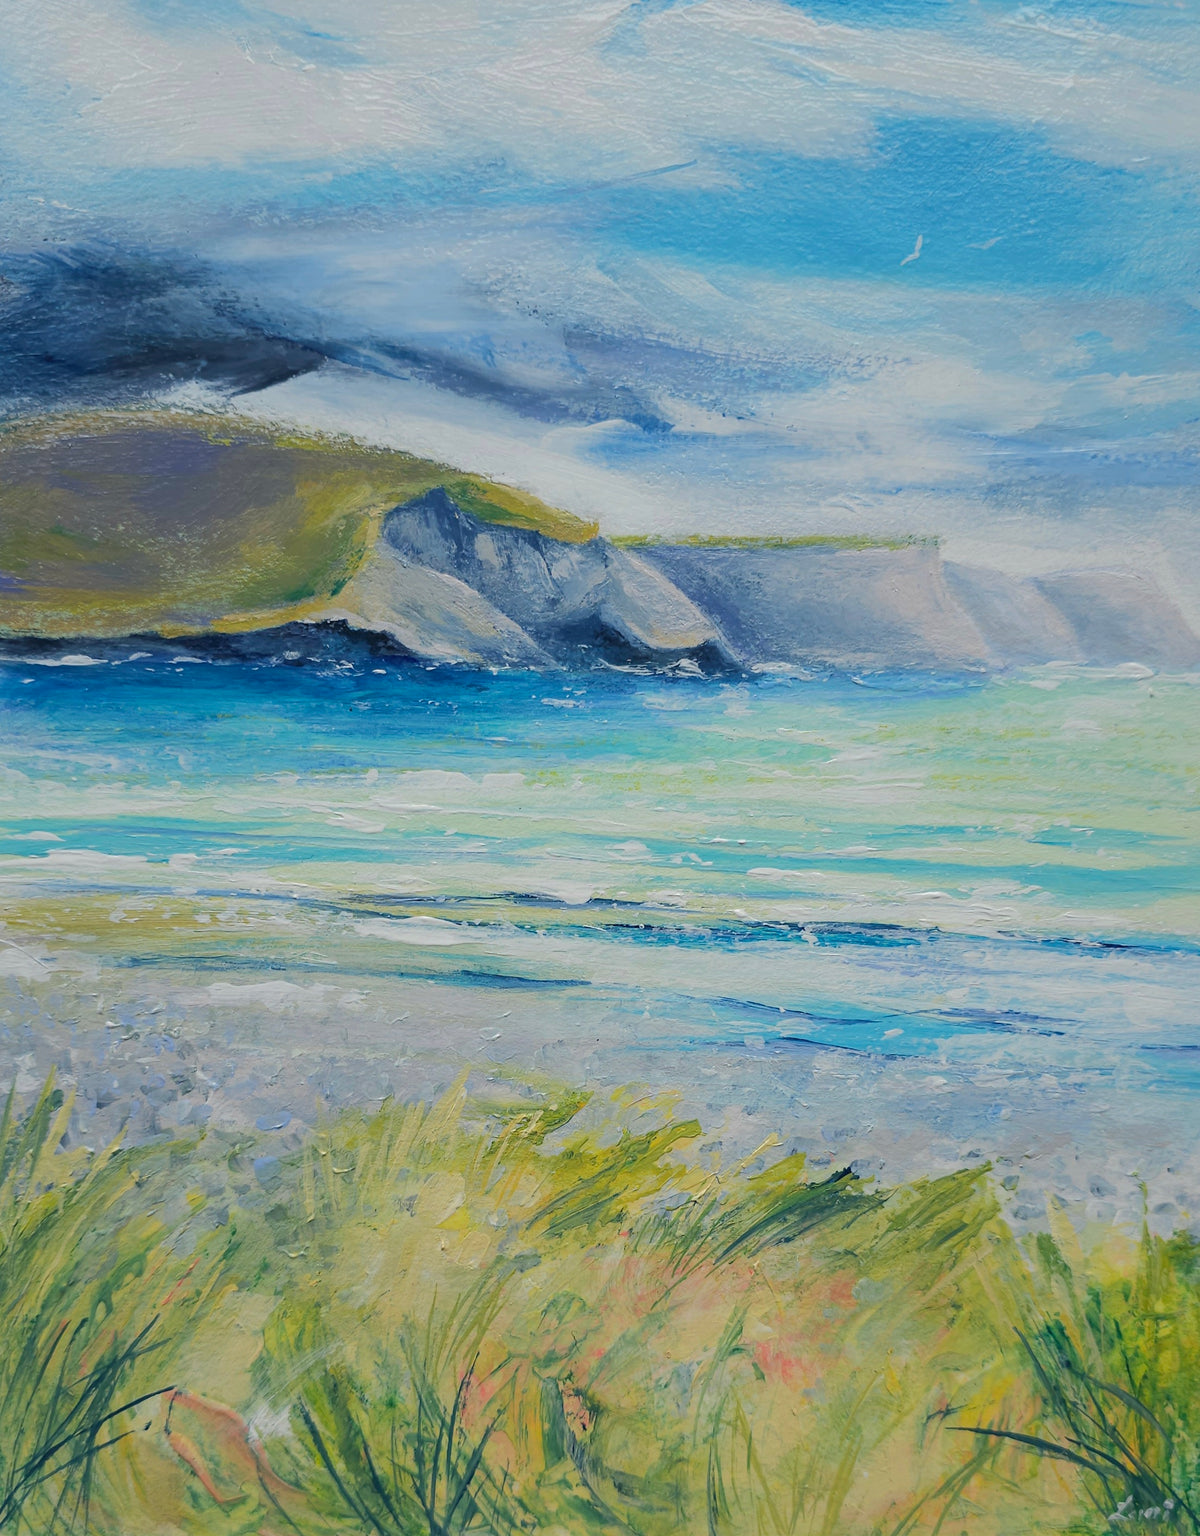 " a Summer's day at Keel beach, Achill"